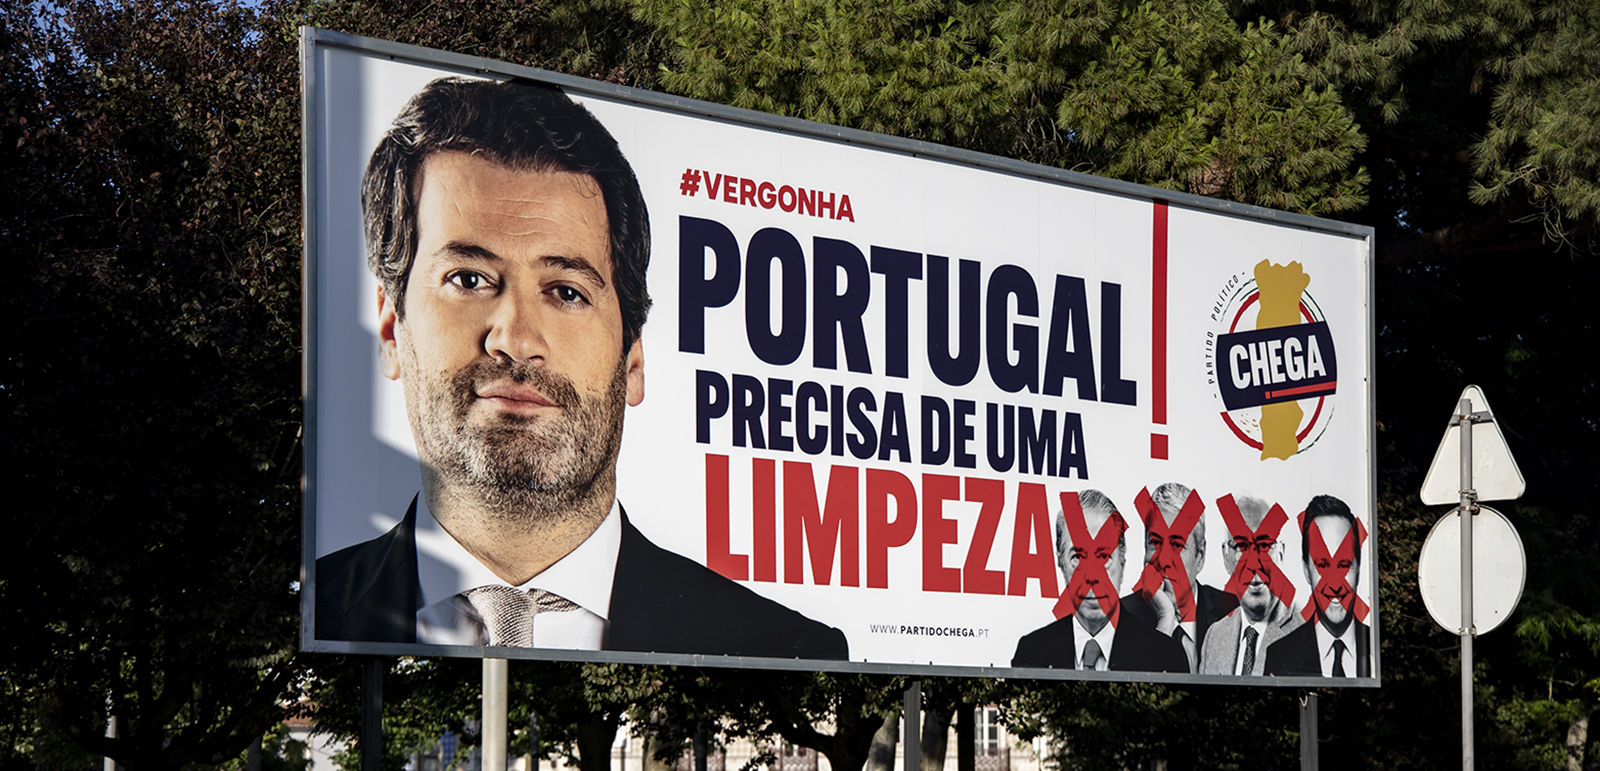 A billboard of the populist far right party Chega with a photo of the President Andre Ventura and the slogan 'Shame, Portugal needs some cleanness' is pictured in Santarem, Portugal on July 7, 2023. (Photo by Emmanuele Contini/NurPhoto via Getty Images)